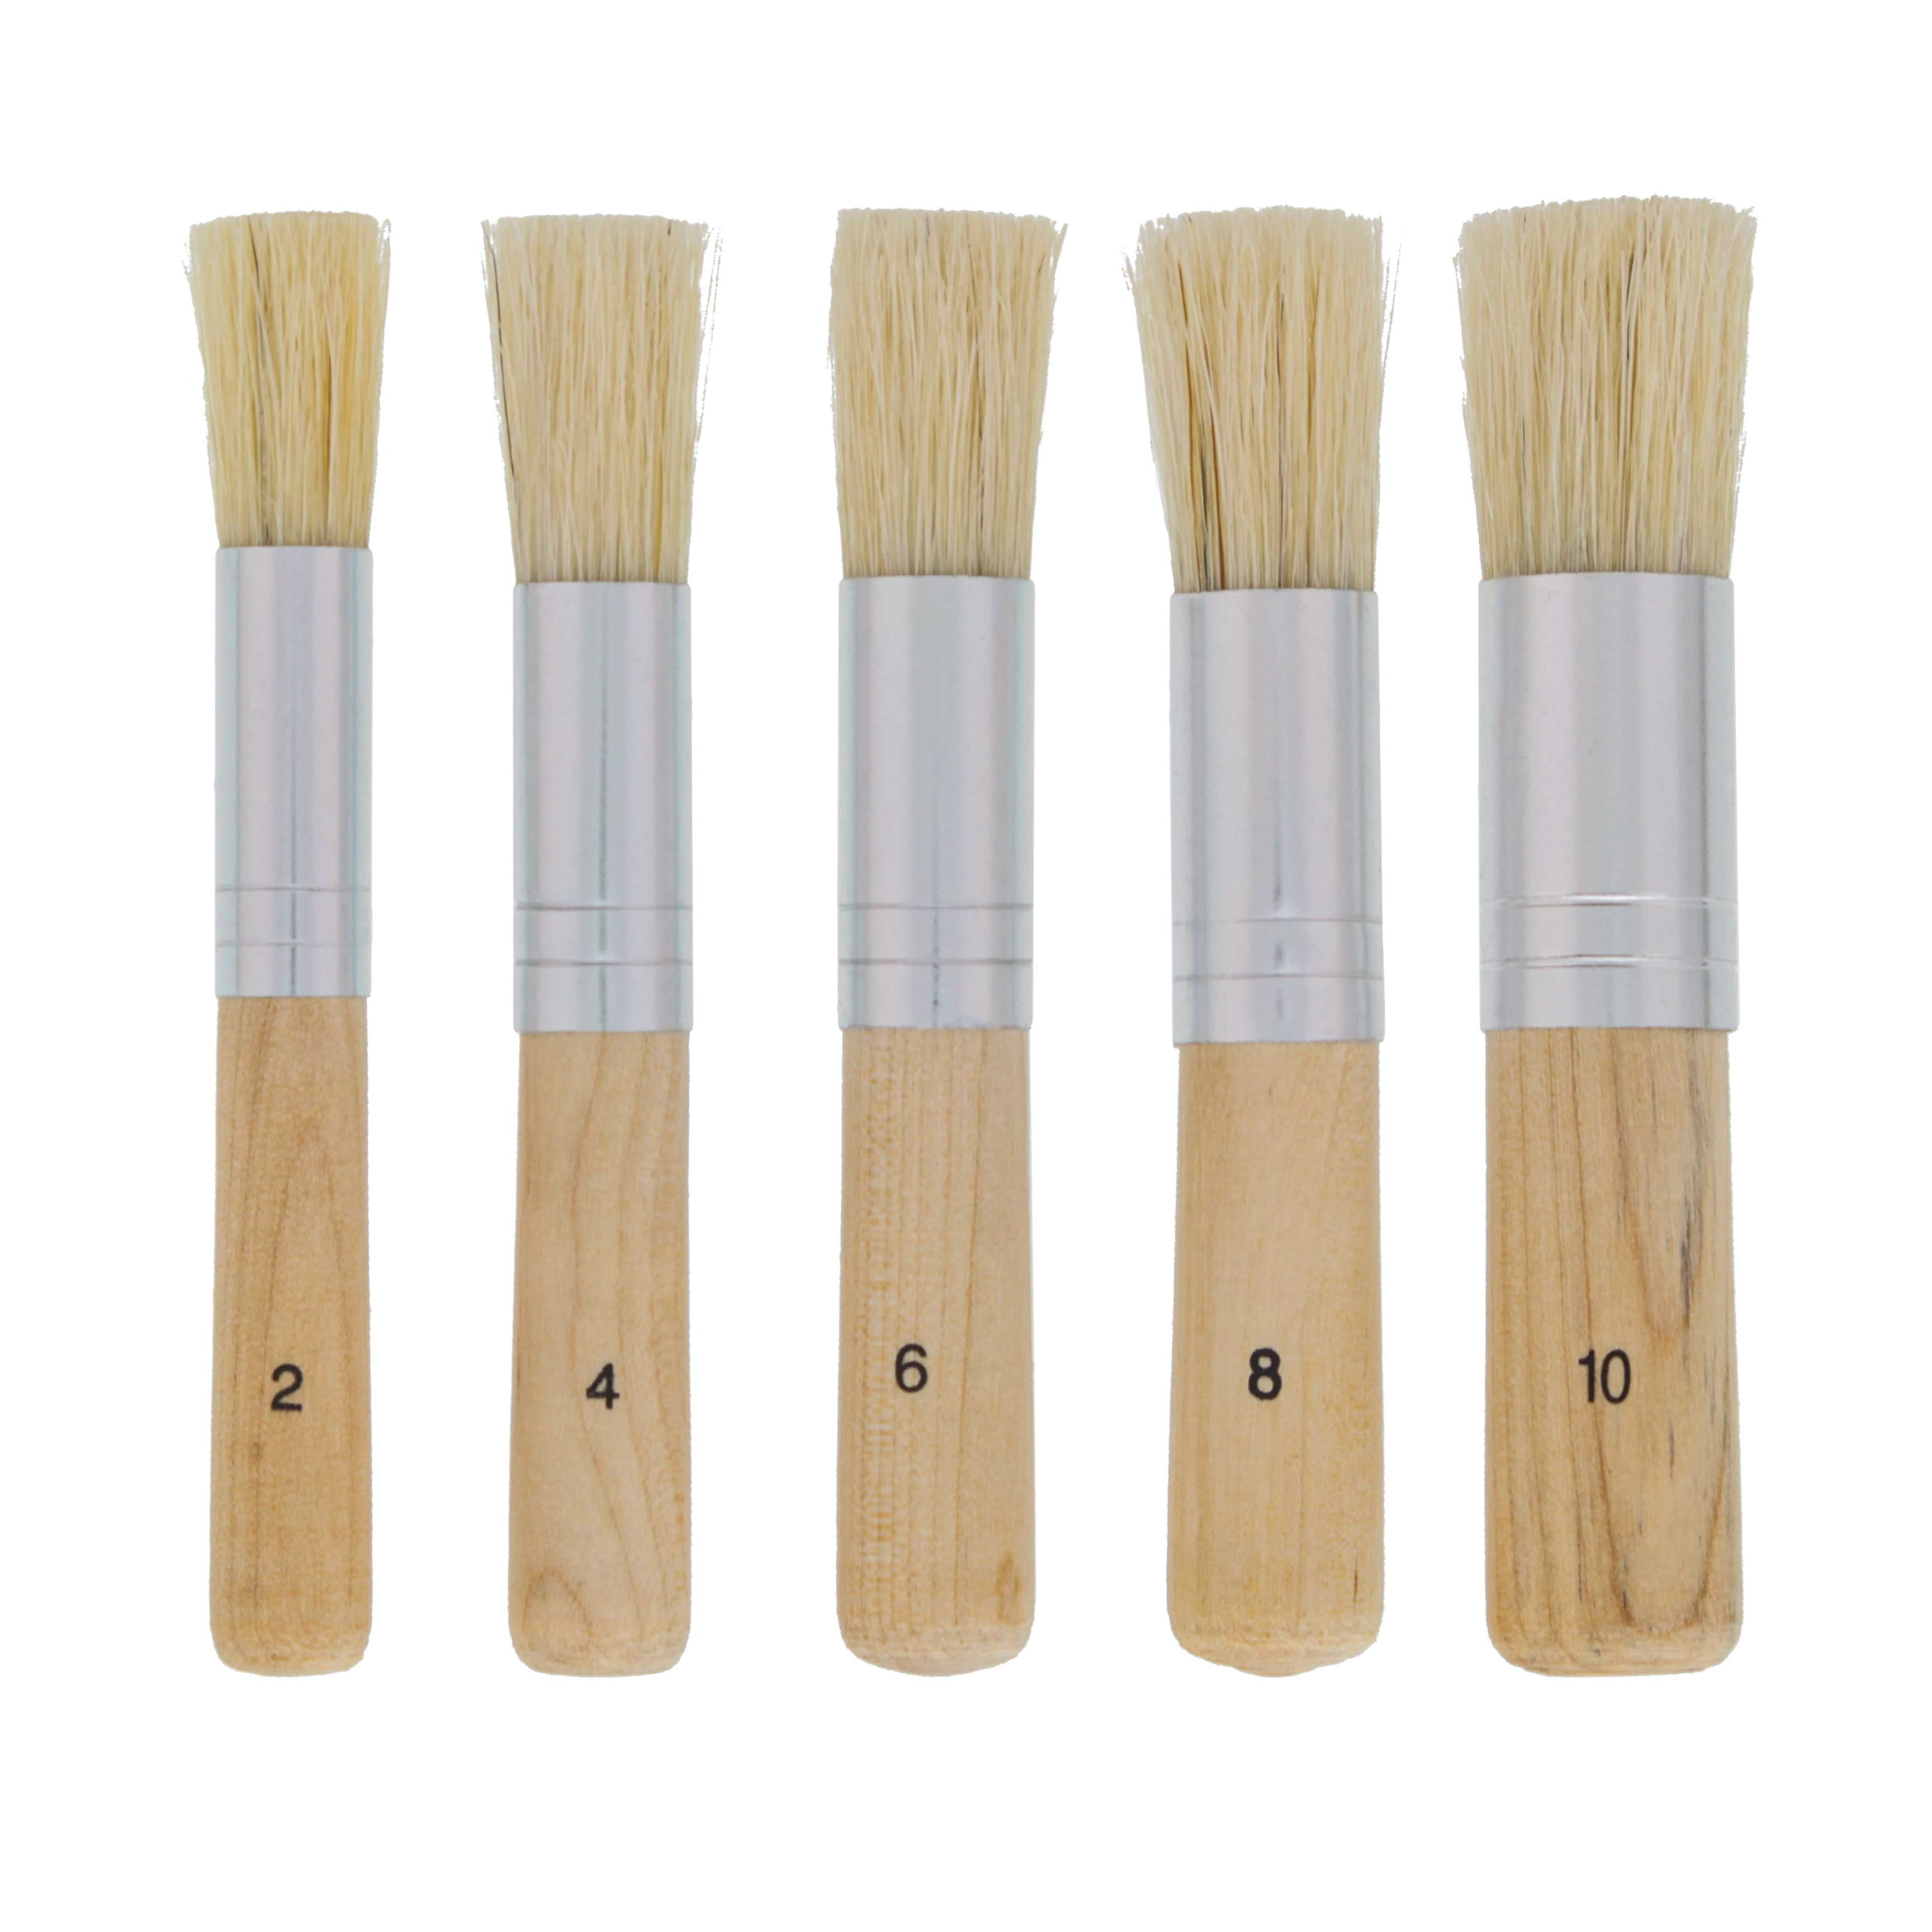 50mm/2" WIDE DISPOSABLE WOODEN PAINT BRUSH Decorating Wall Handle Art DIY Tool 